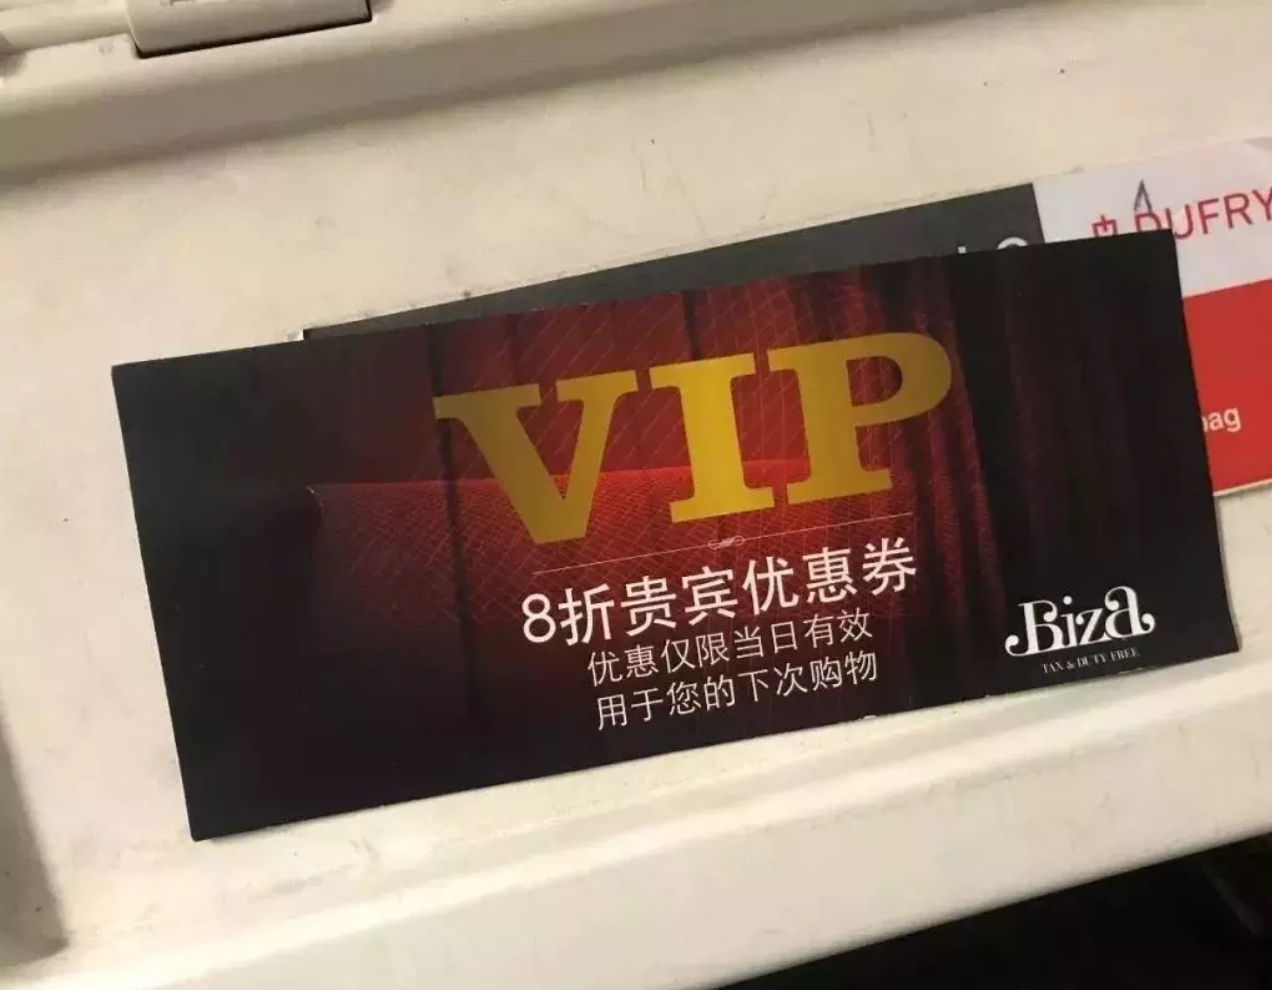 Compared to foreign tourists, Chinese need to spend nearly 13 times more to enjoy the same 20 percent VIP discount. Photo: Weibo/Renjiannaipao